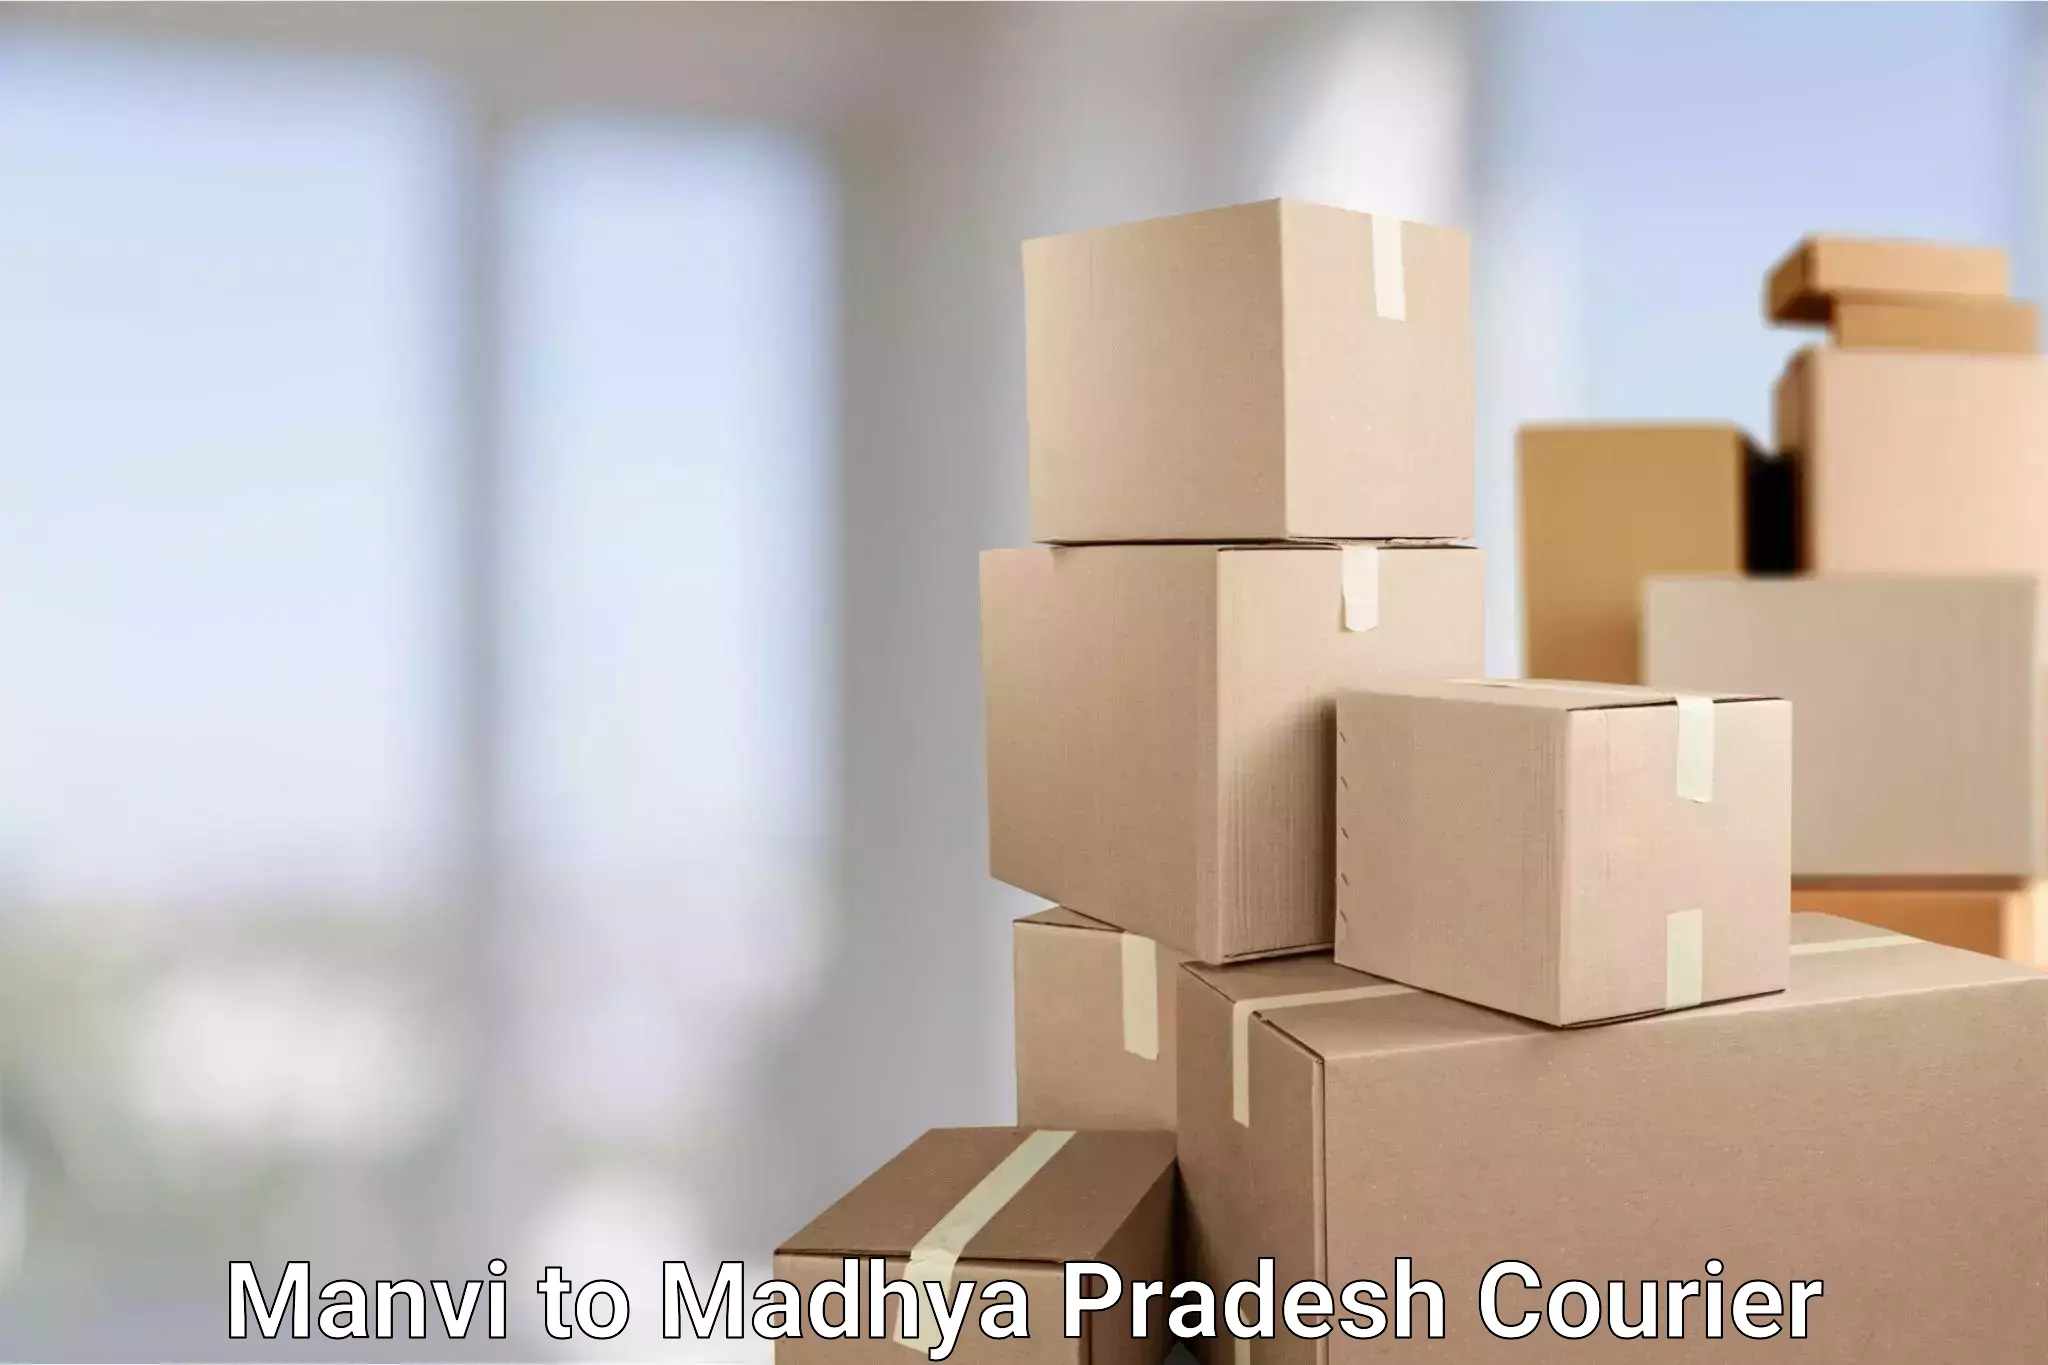 Nationwide delivery network in Manvi to Indore